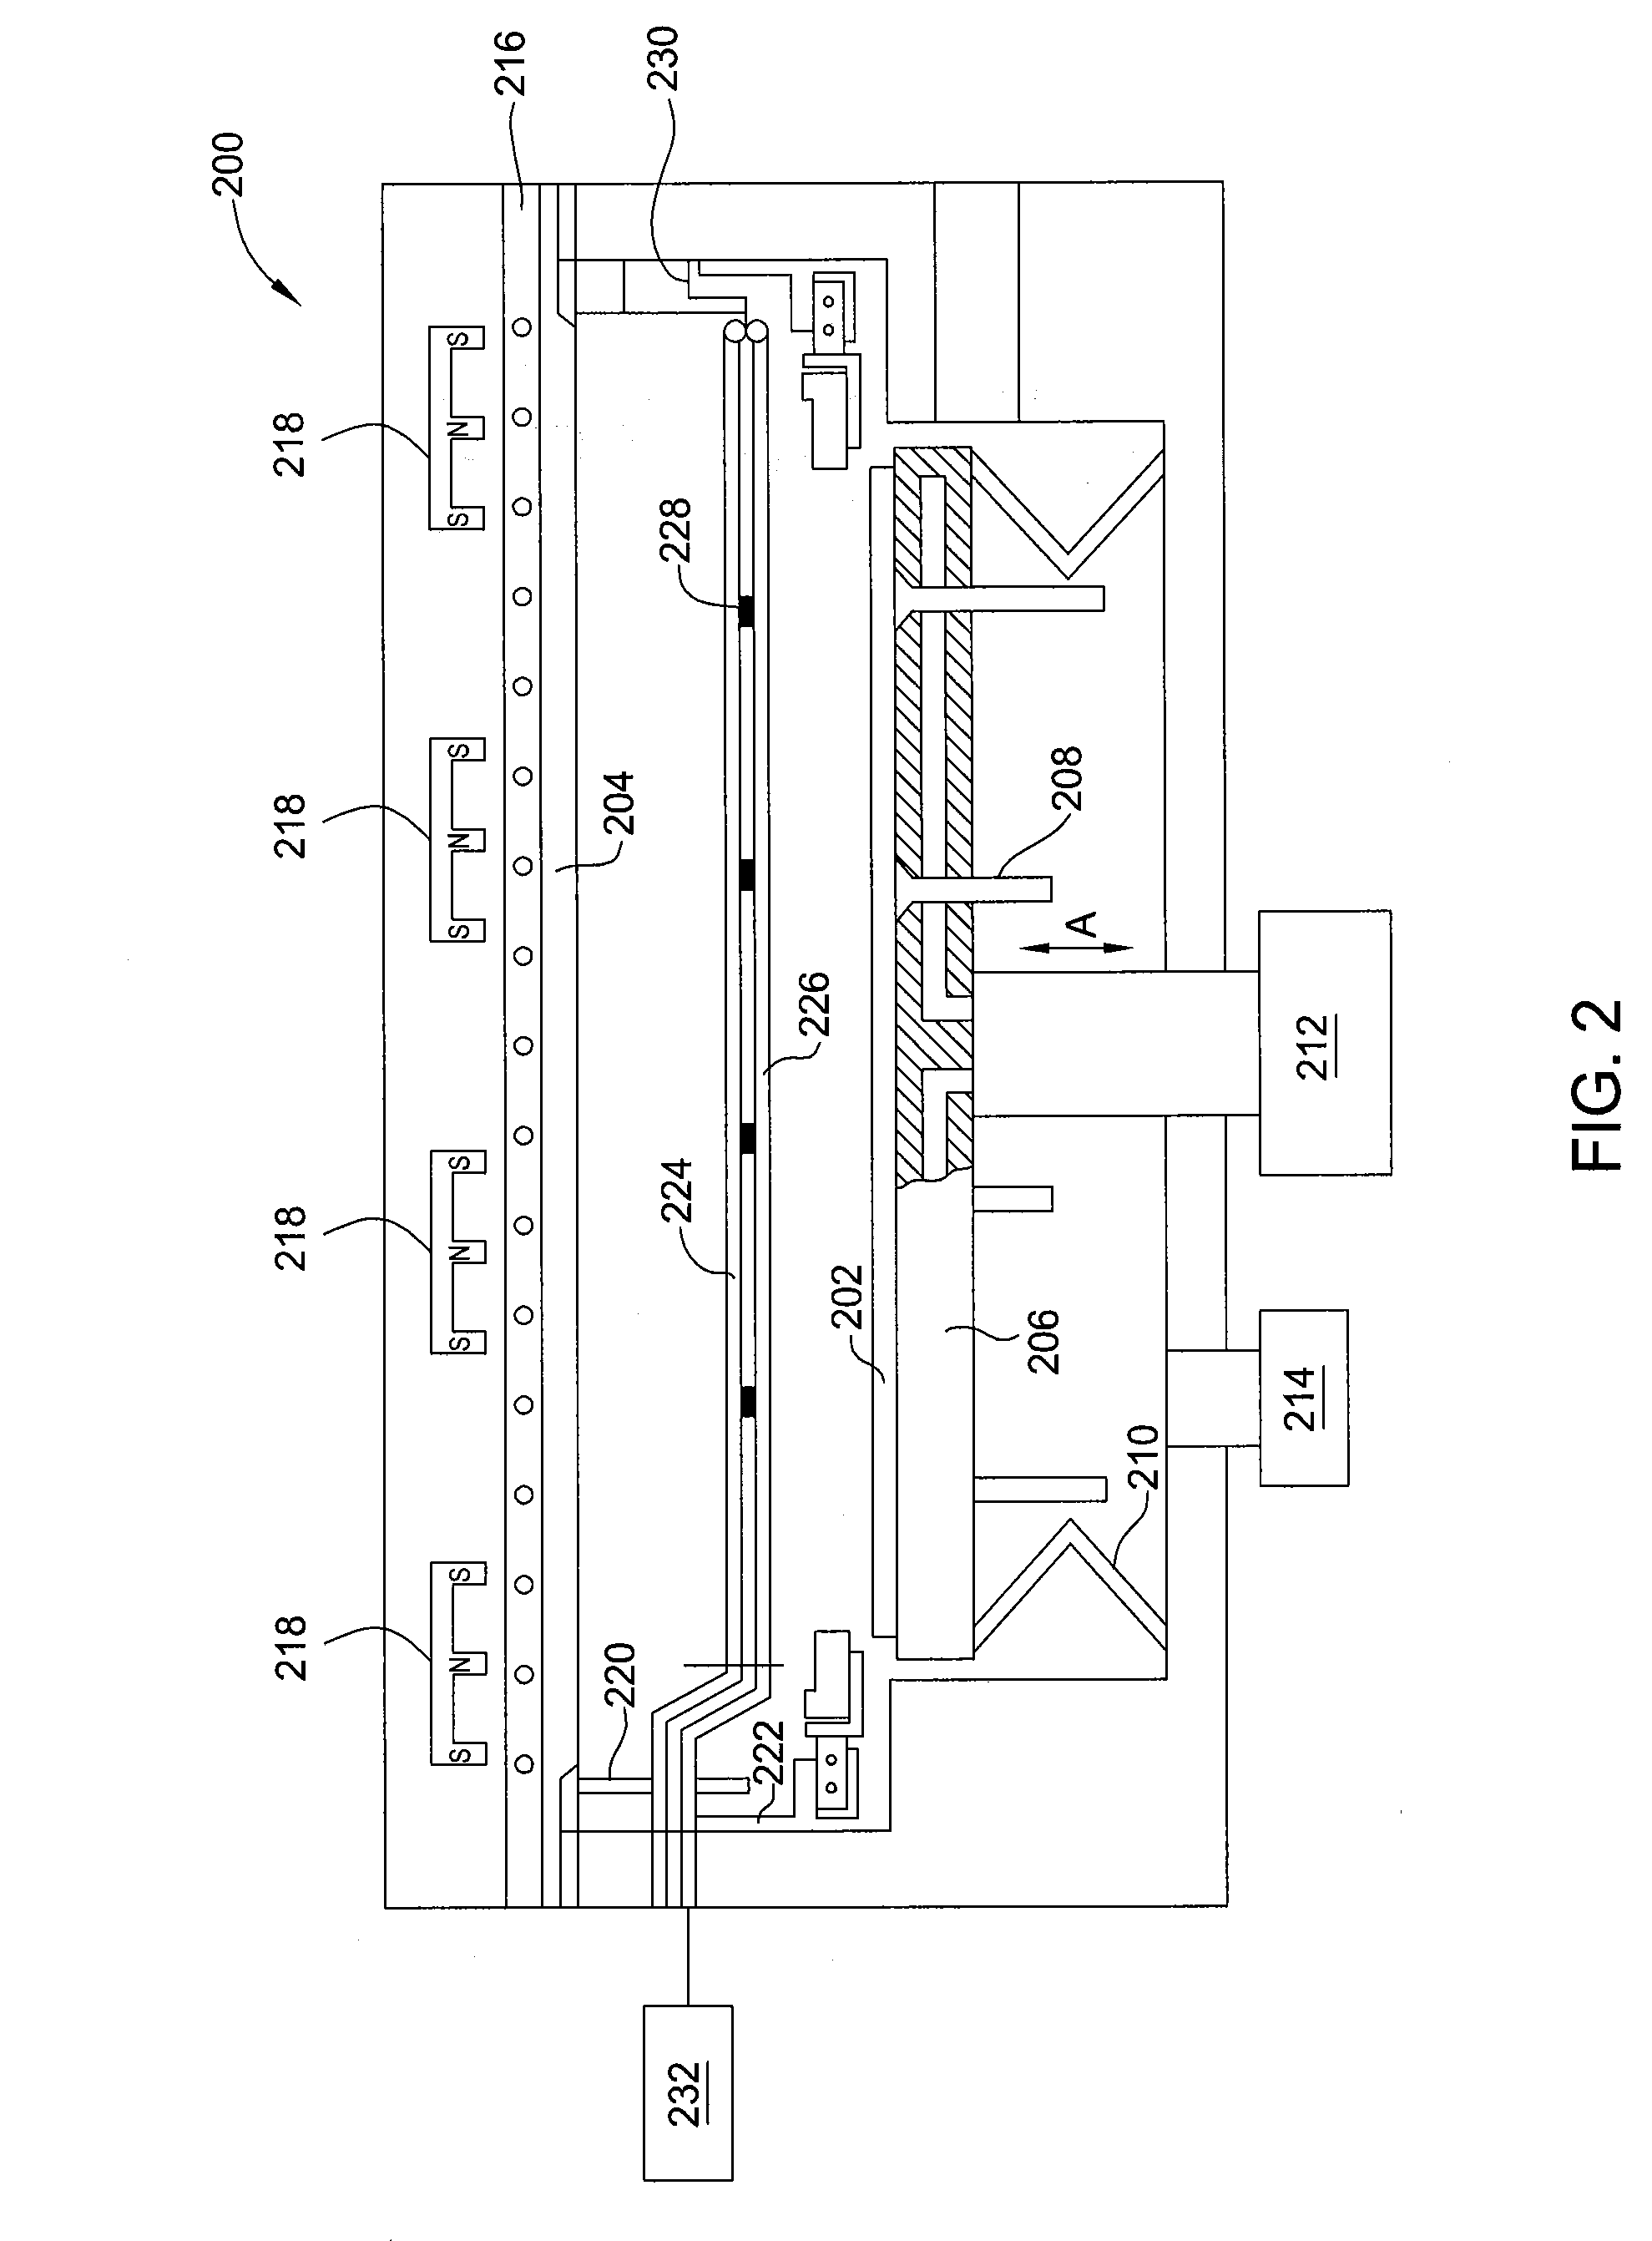 Methods for stable process in a reactive sputtering process using zinc or doped zinc target